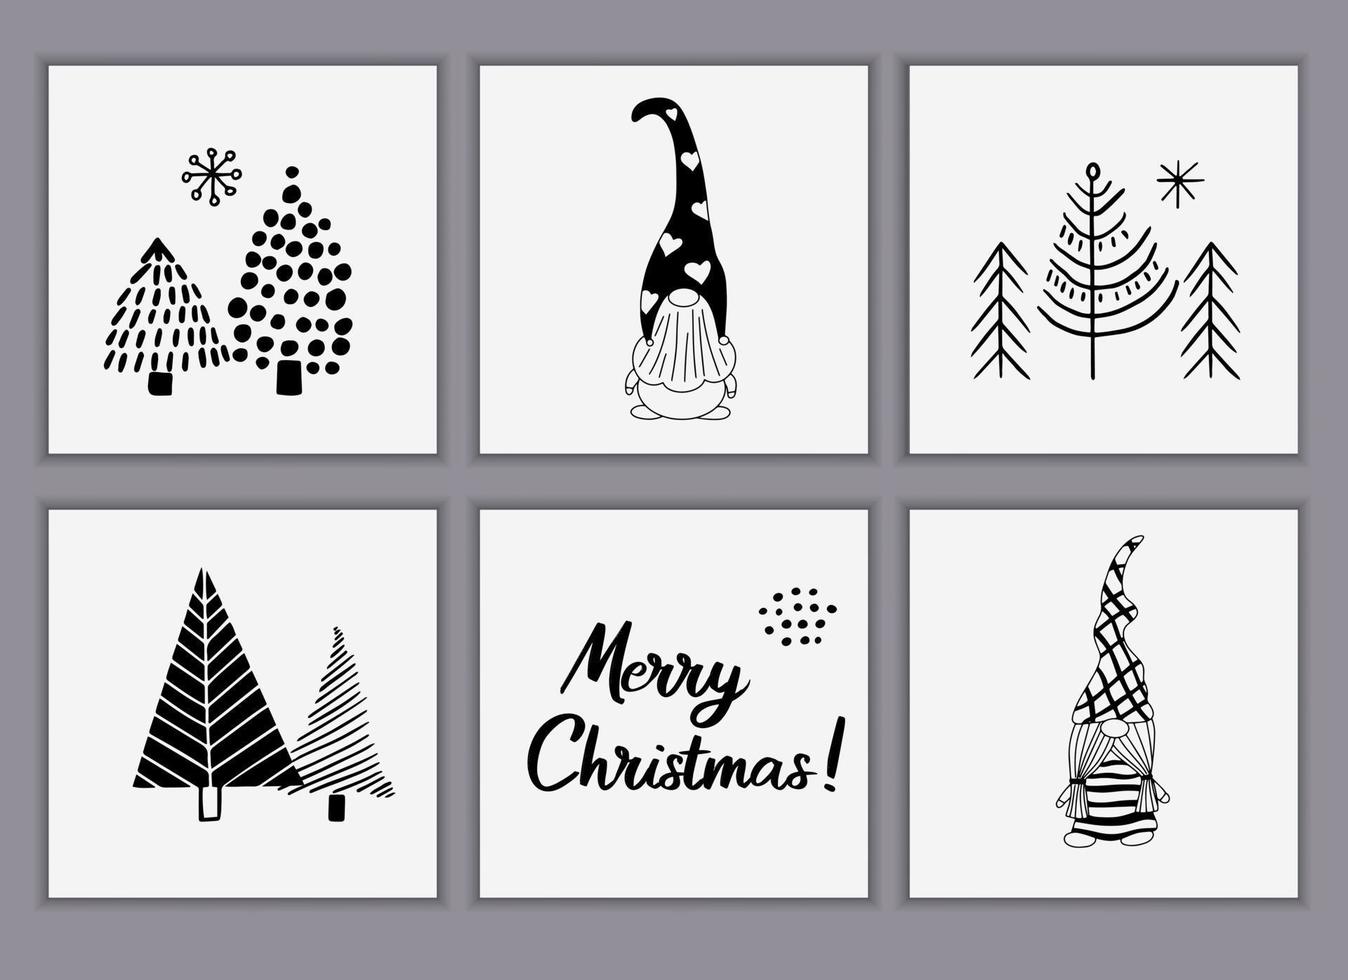 Set of Christmas greeting cards made of hand-drawn doodle elements. Christmas trees, cute gnomes in Scandinavian style. Vector templates for posters or invitations